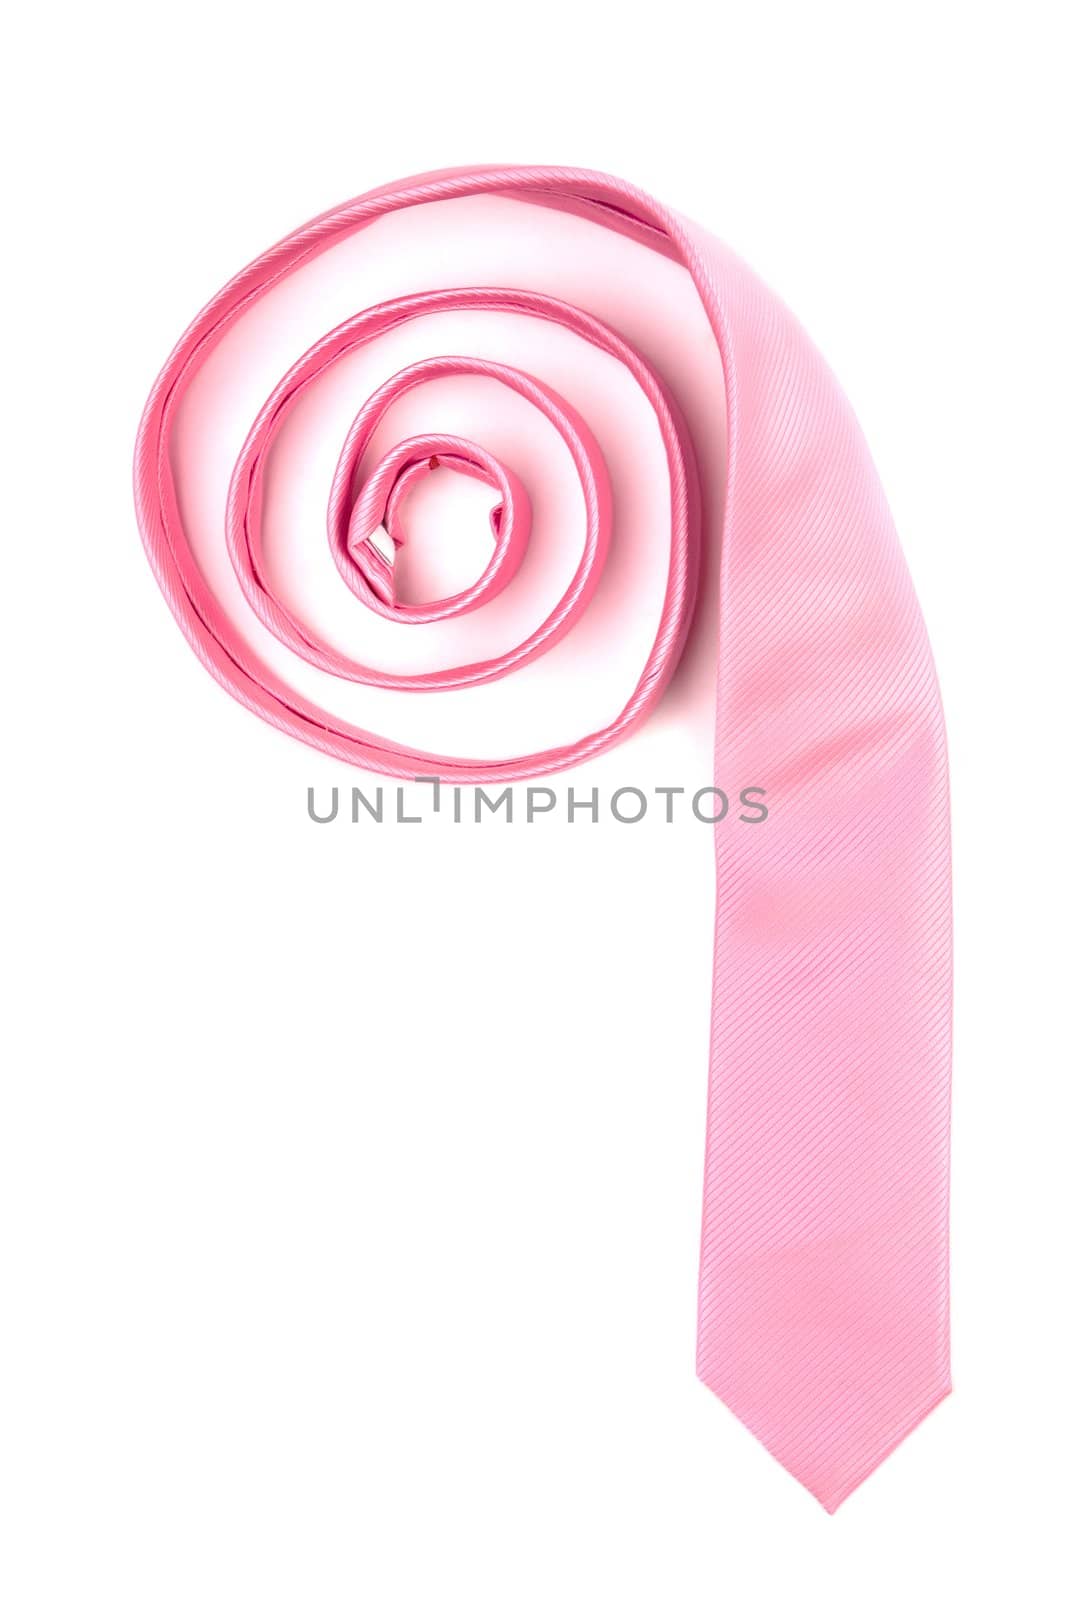 Pink tie by Gravicapa